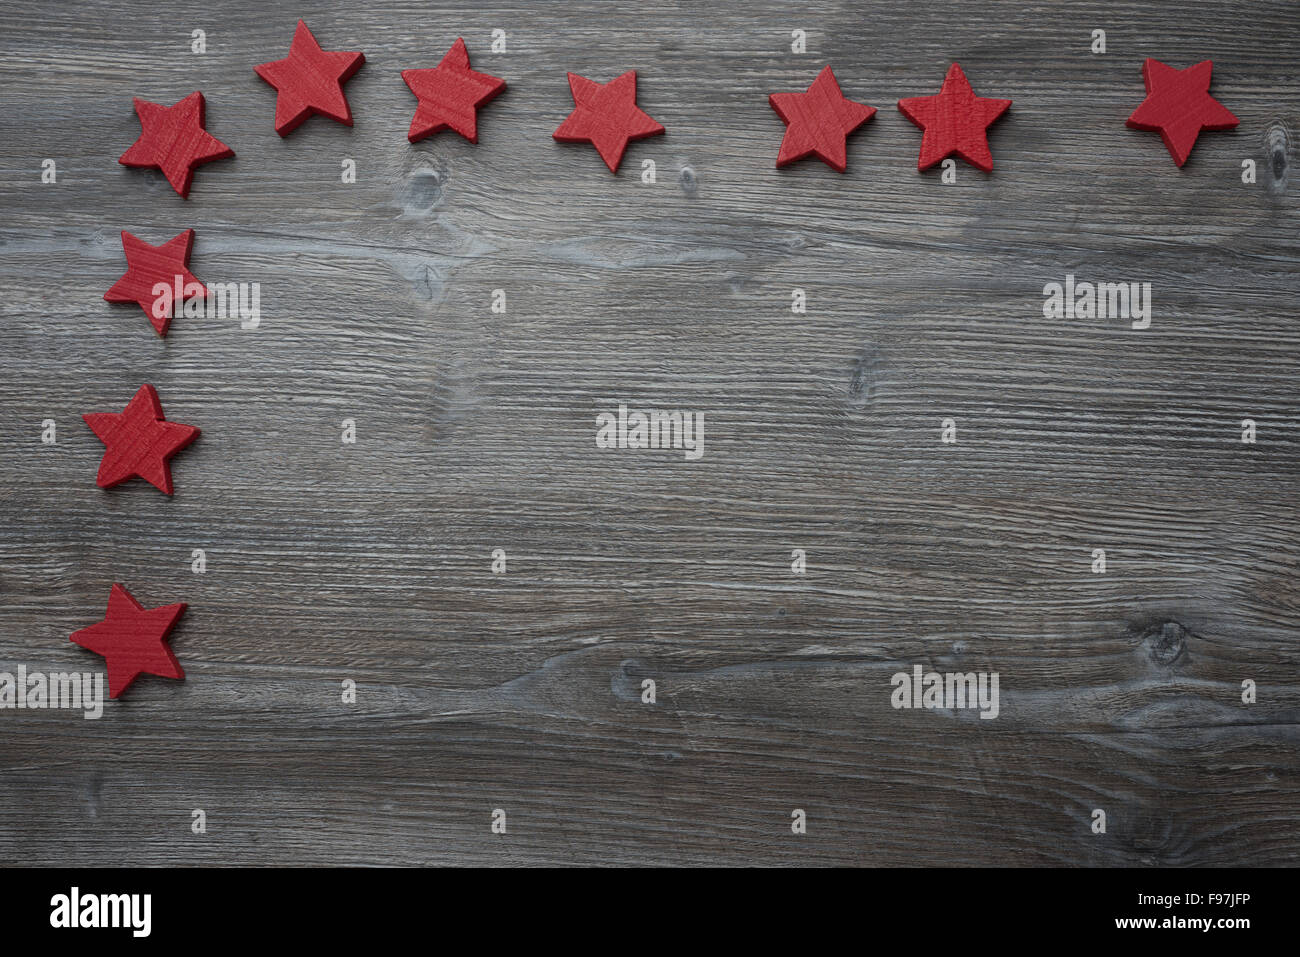 Wood background isolated with red stars Stock Photo